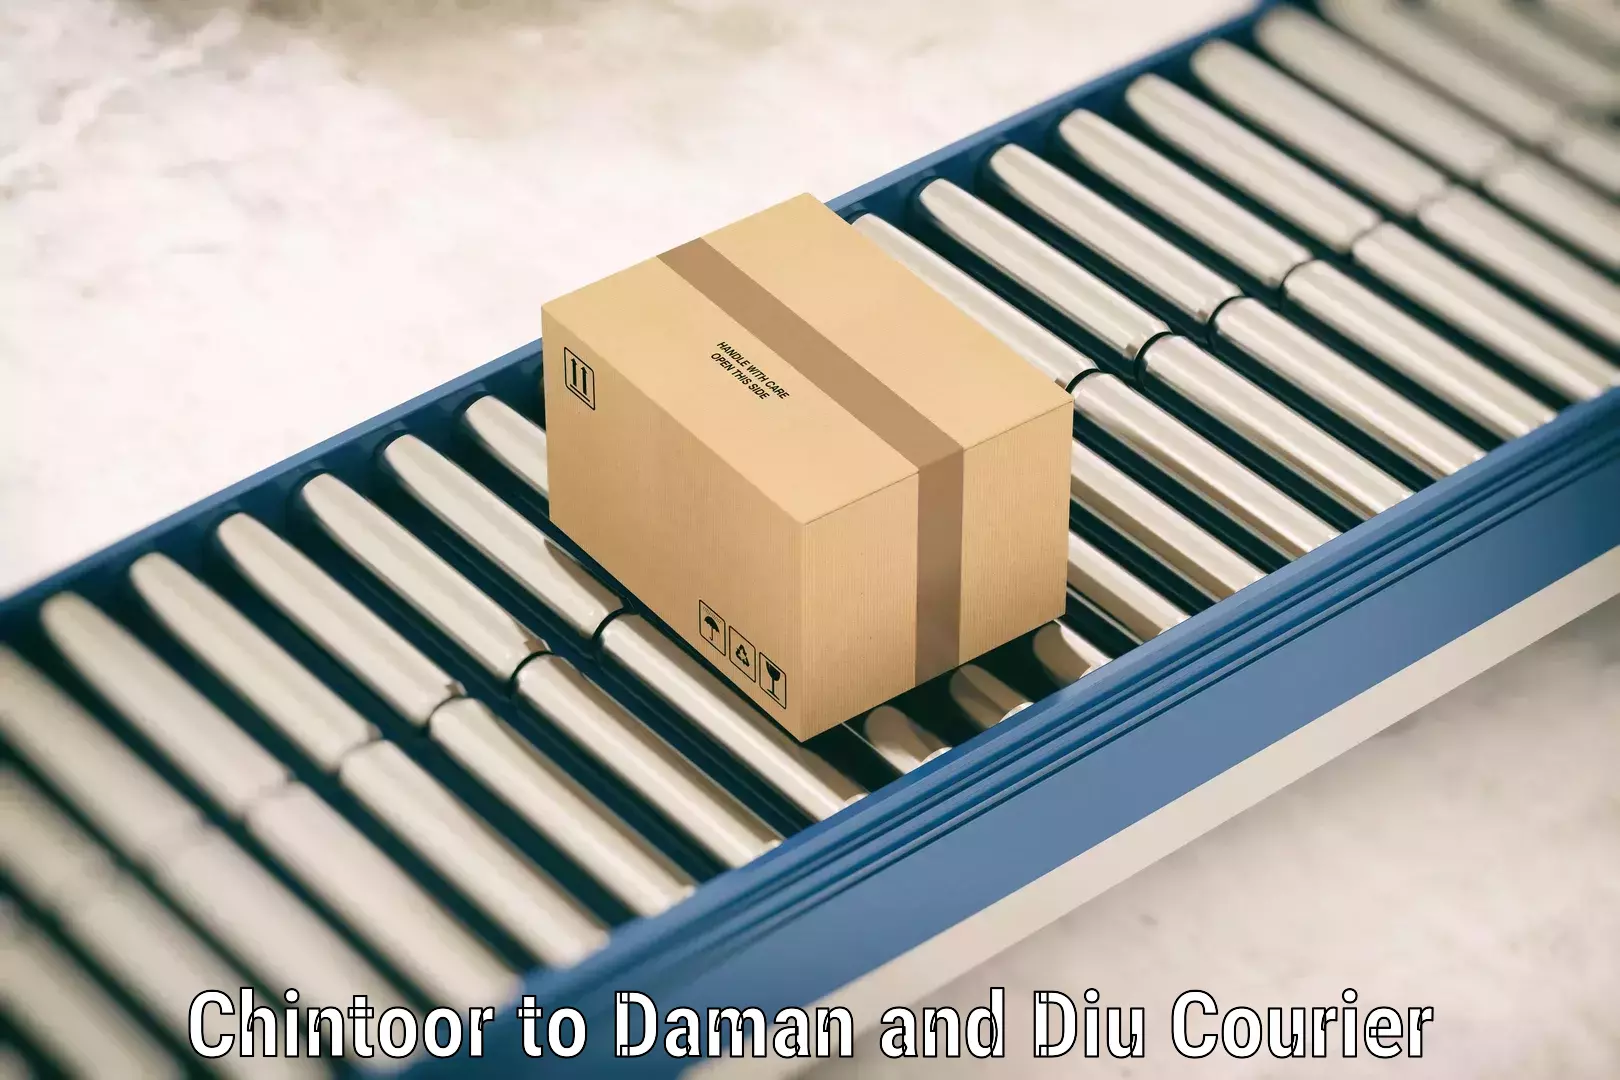 Hassle-free luggage shipping Chintoor to Daman and Diu